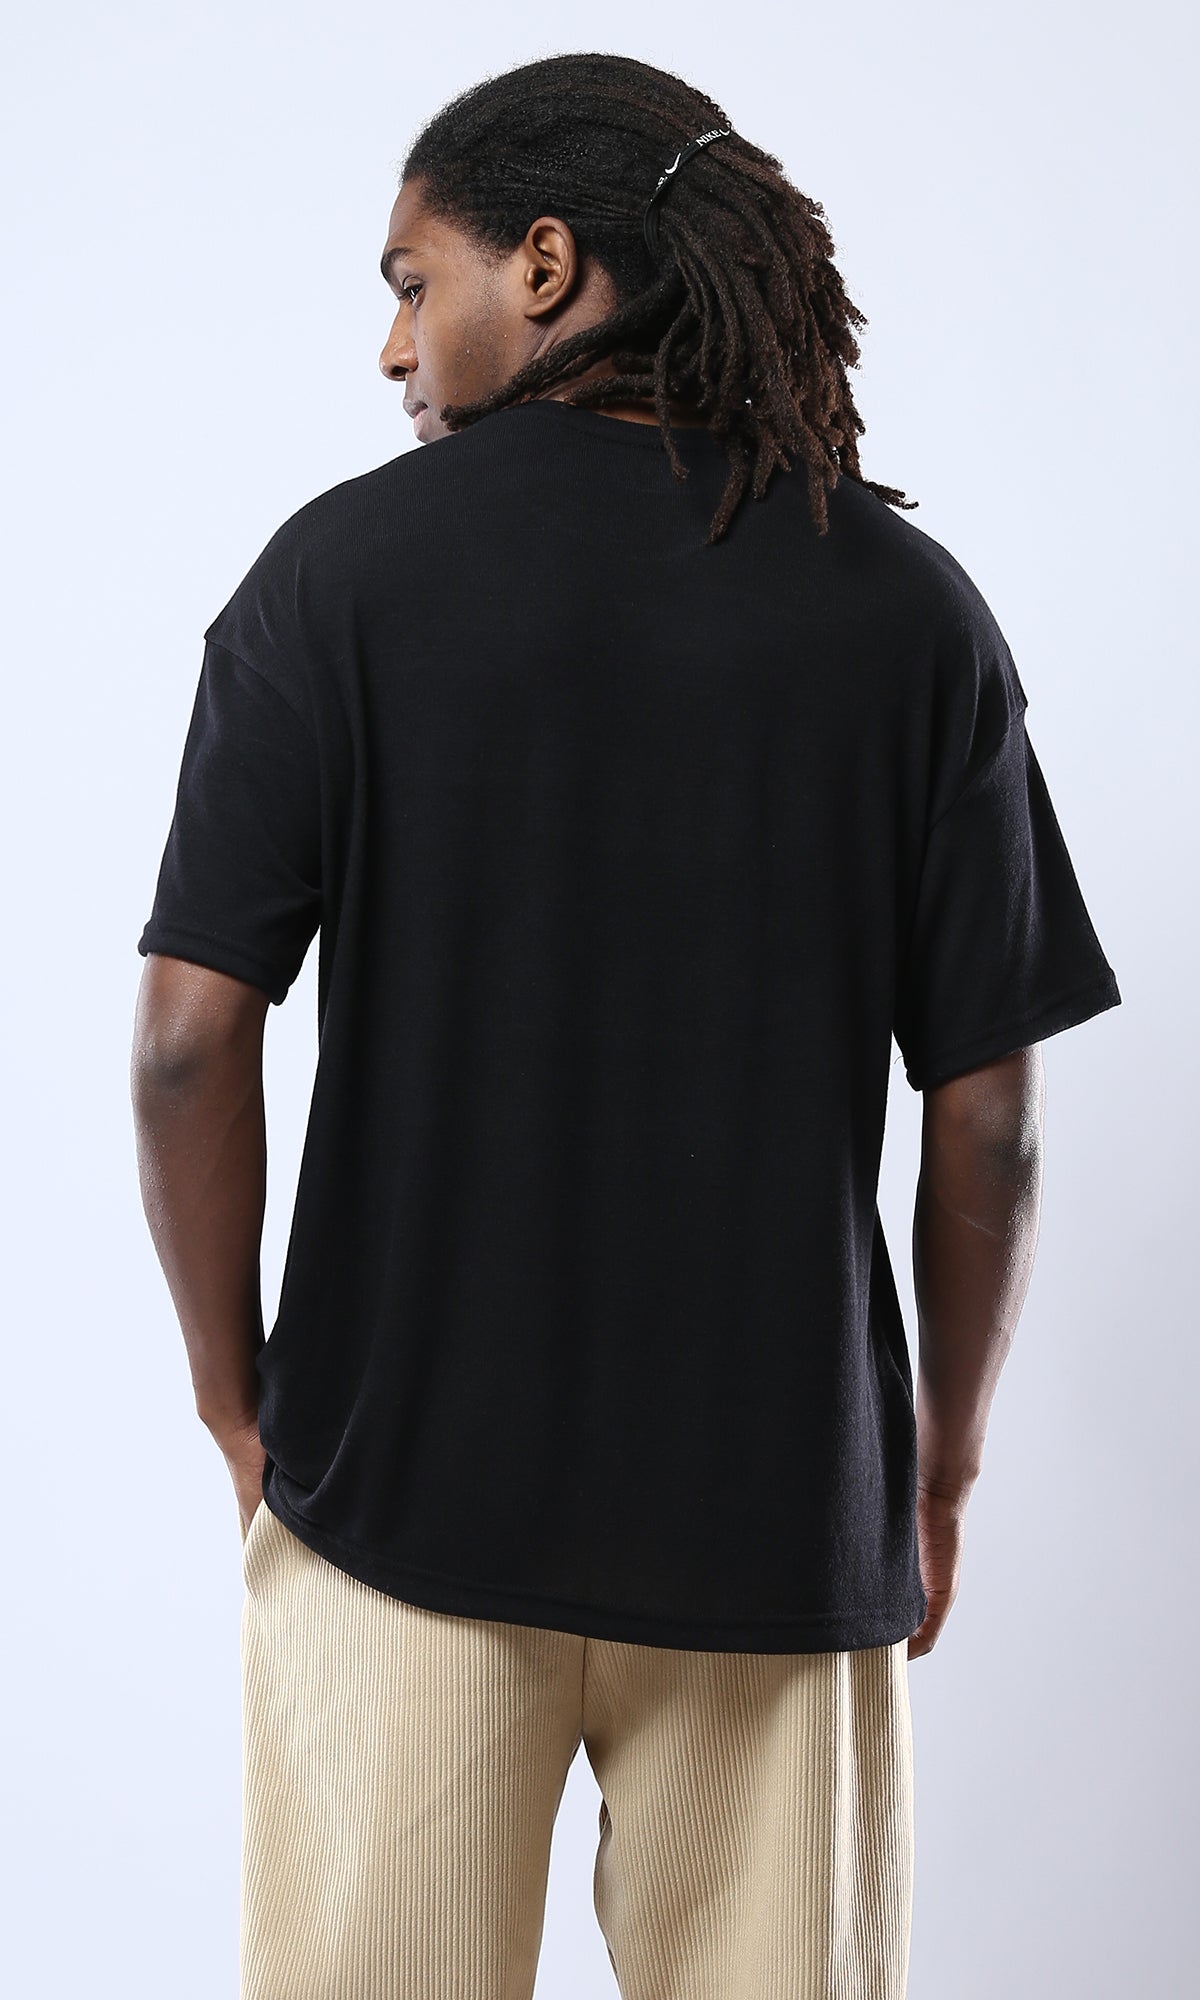 O178883 Lightweight Solid Relaxed Fit Black Tee